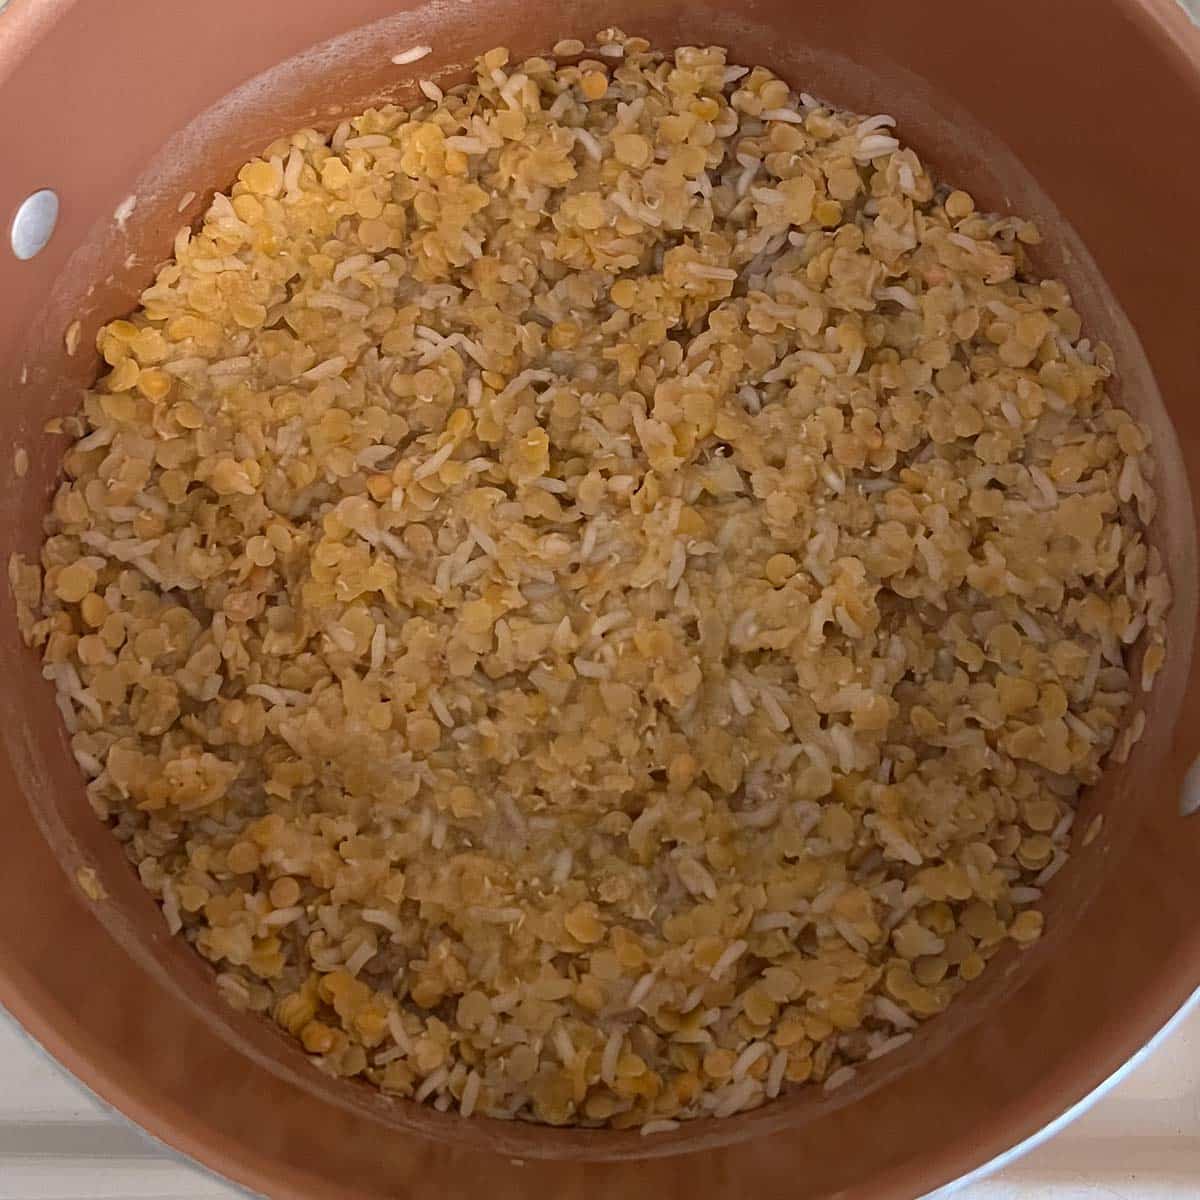 lentils and rice after absorbing water